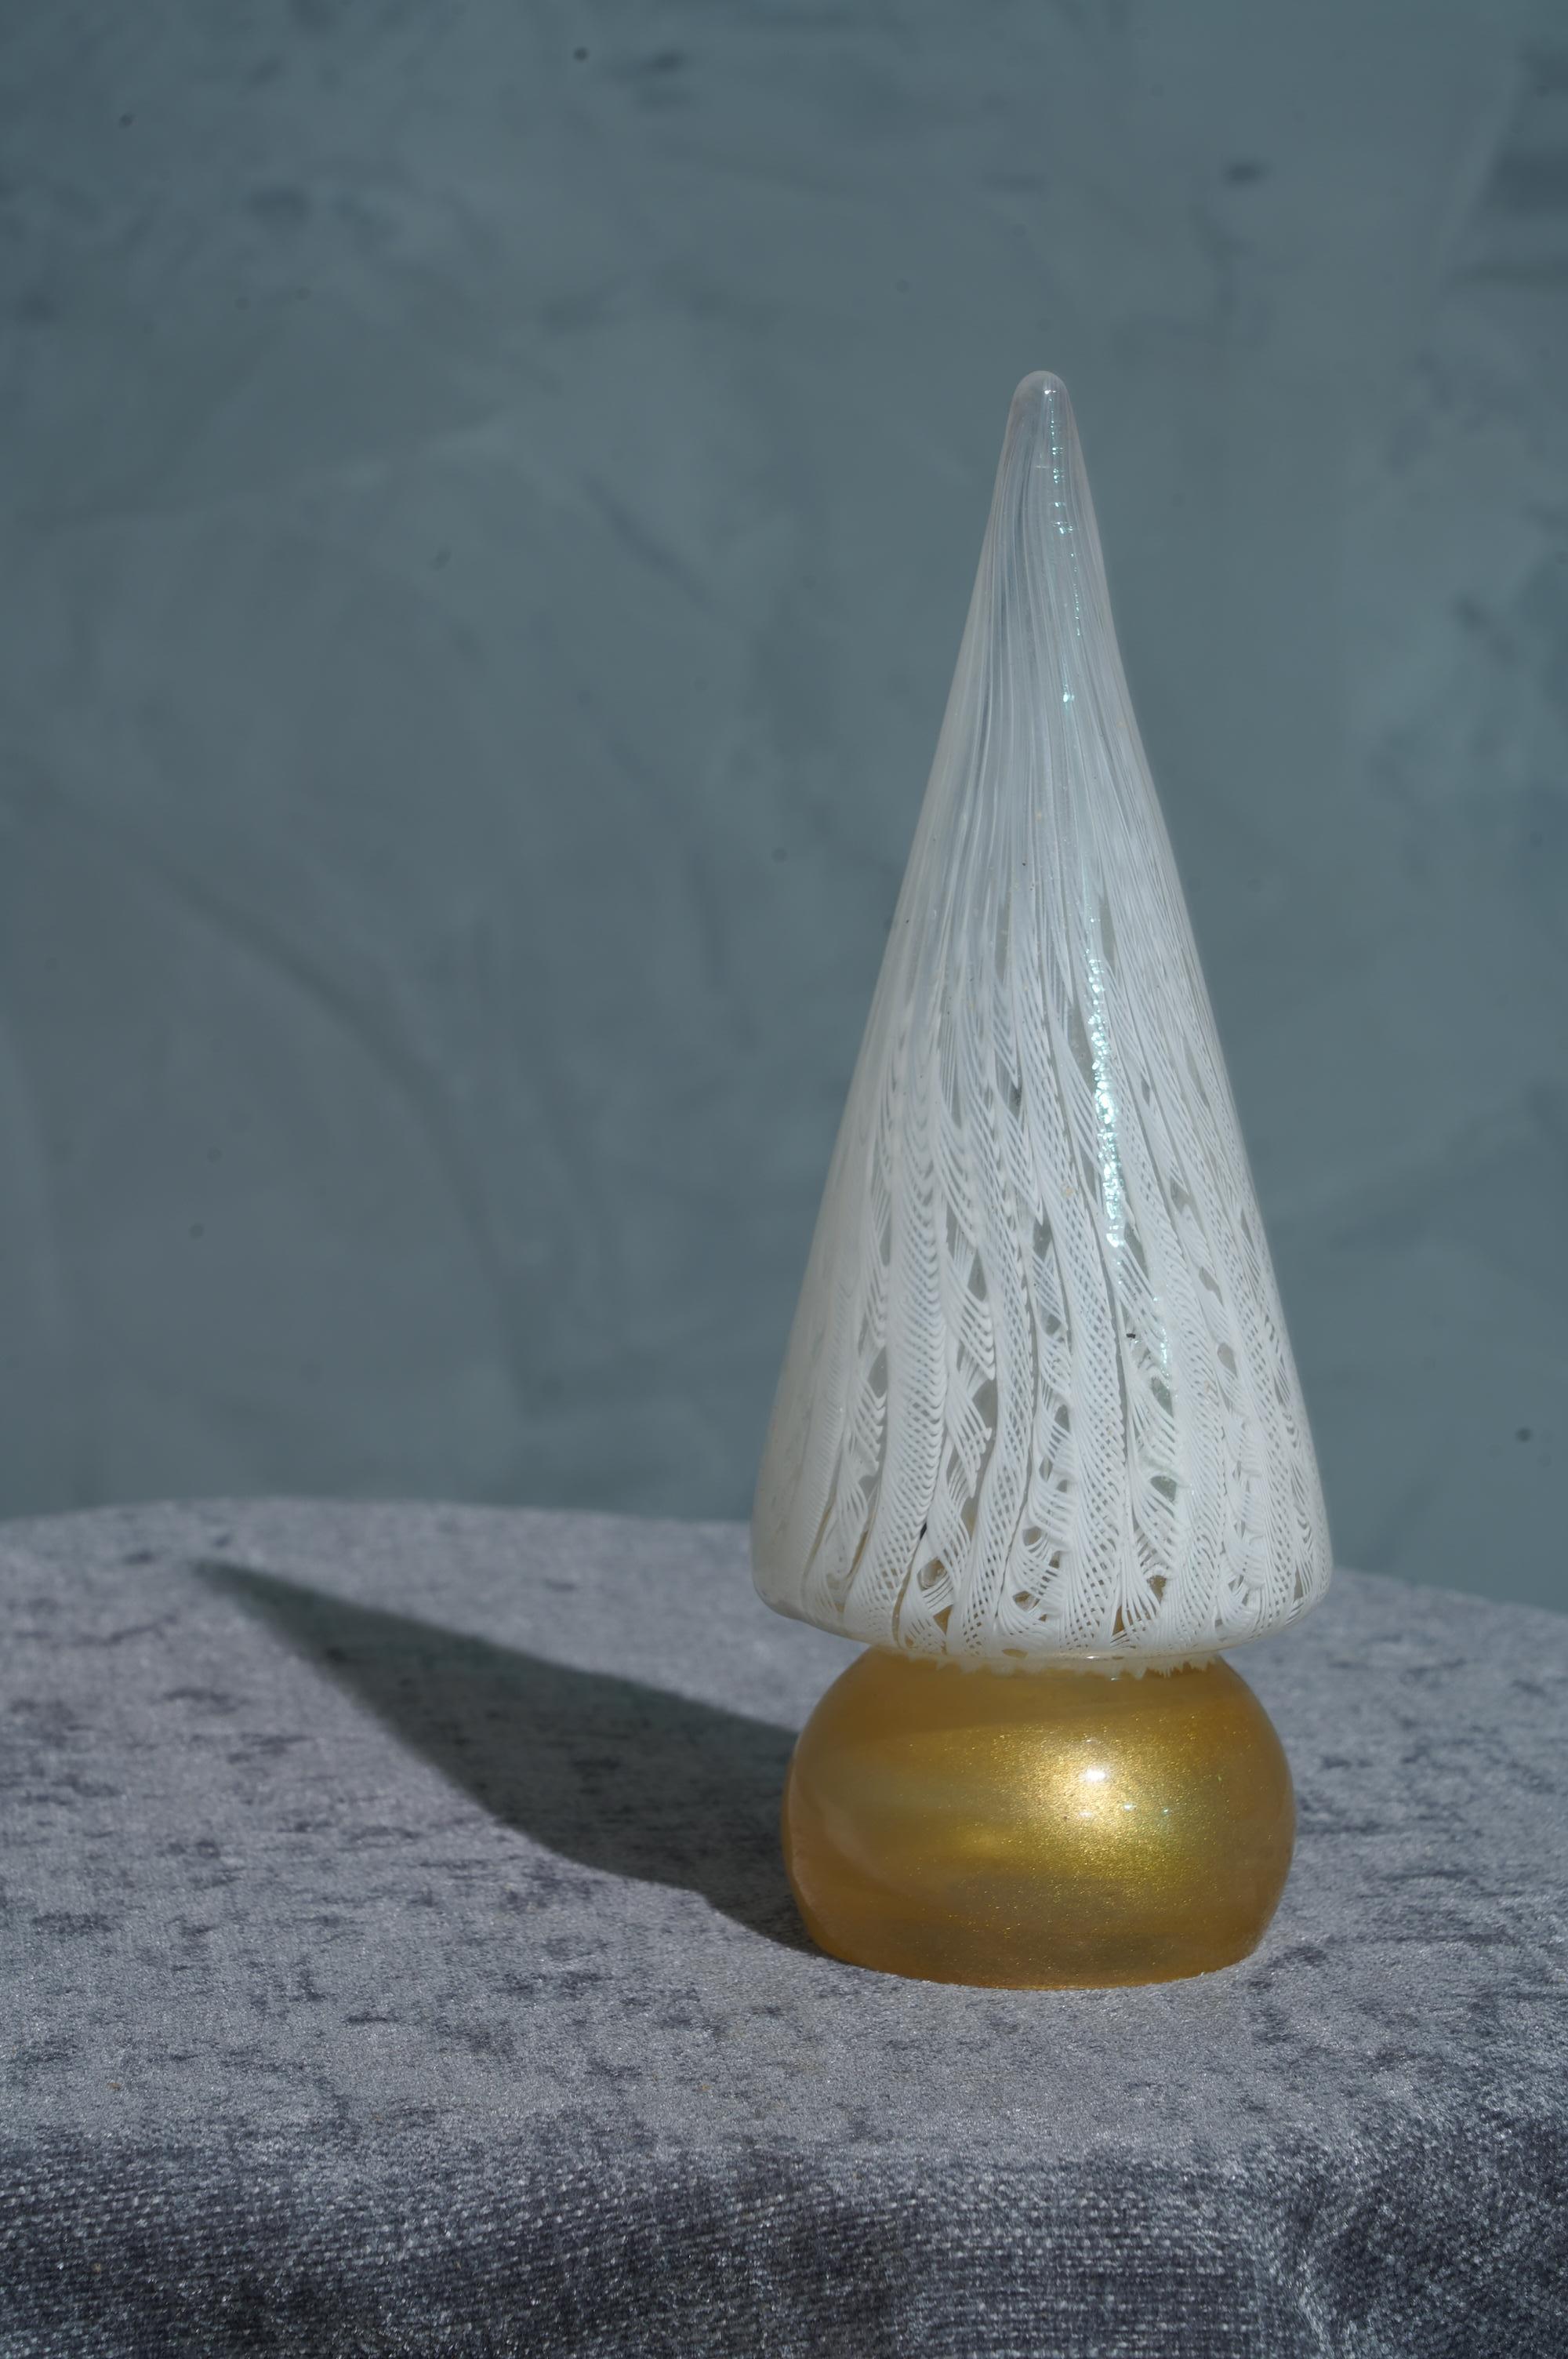 Very particular sculpture of Tree in Murano glass, stylized and linear like the art of glass in Venice commands.

The sculpture represents a stylized Christmas tree, with a gold base and a white part of the stem. You can see from the photos the